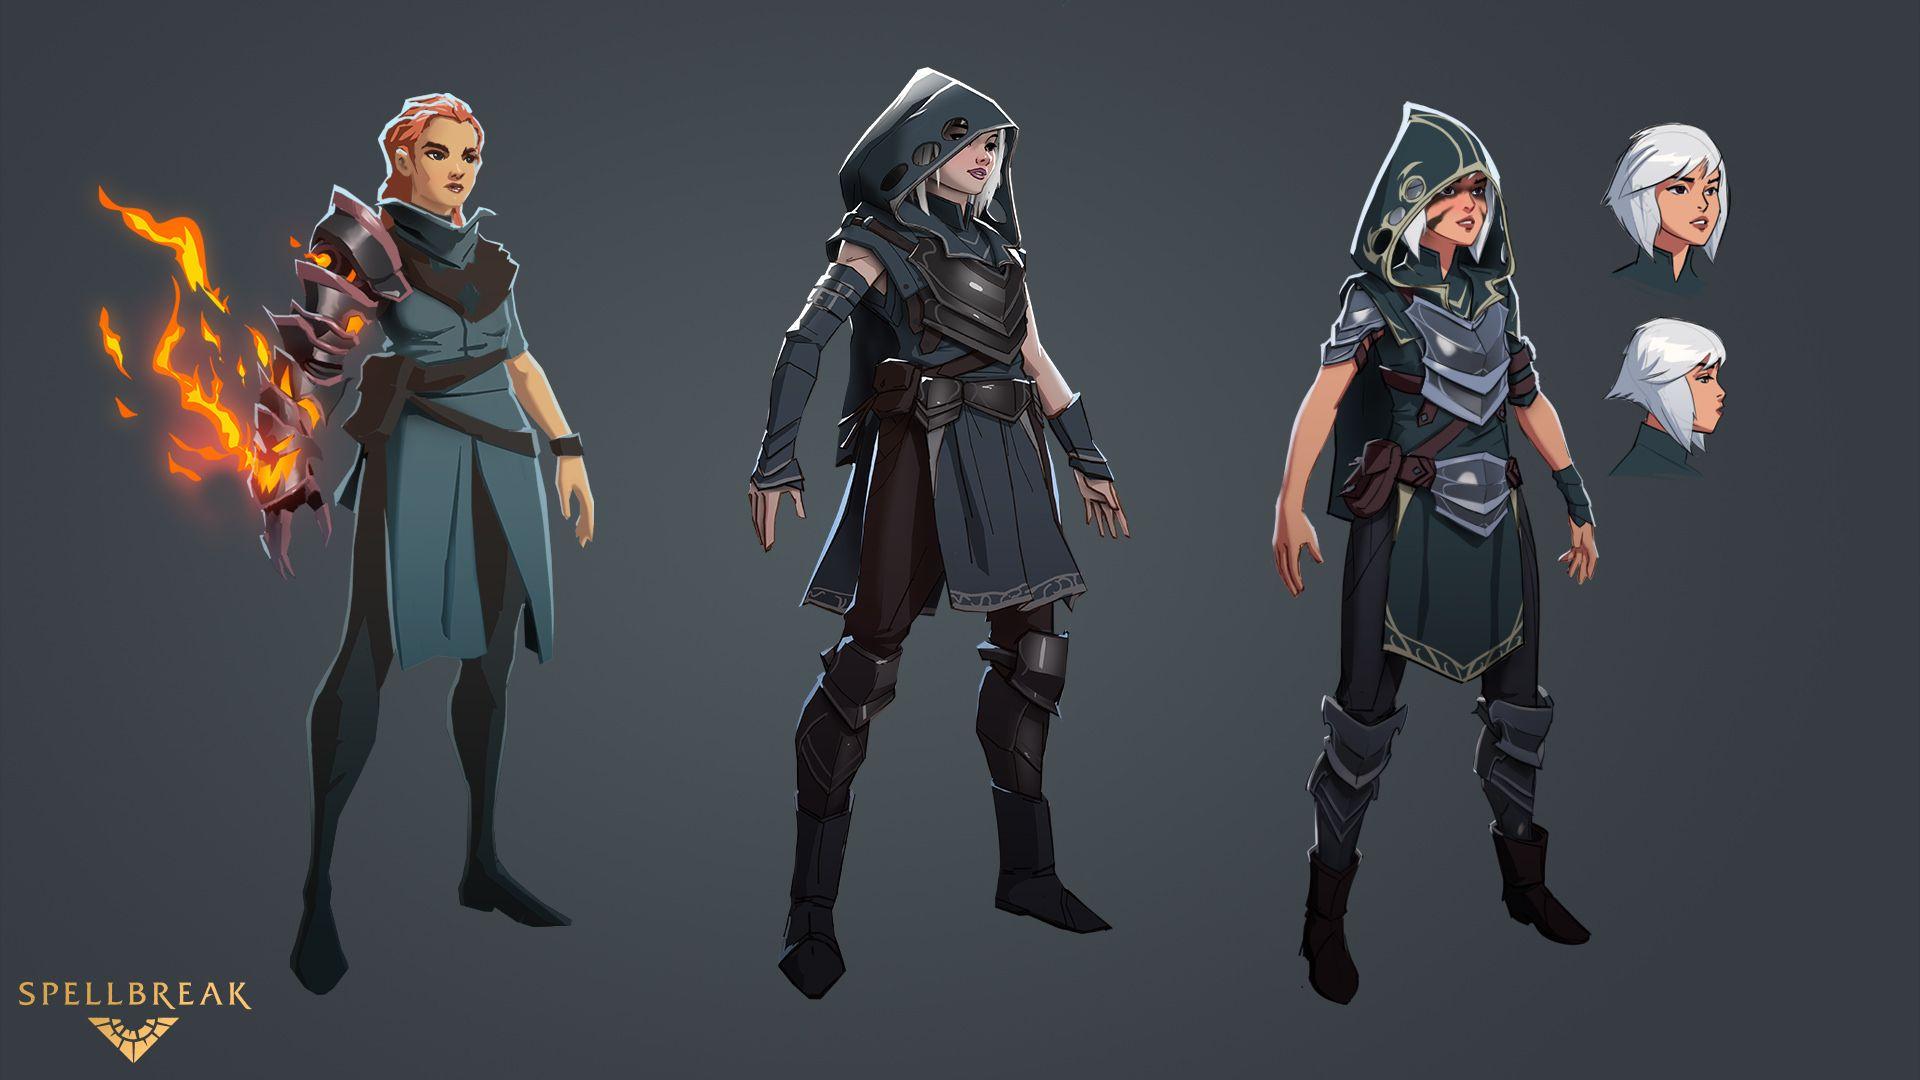 A look at Spellbreak's first character model oh, and the game has a